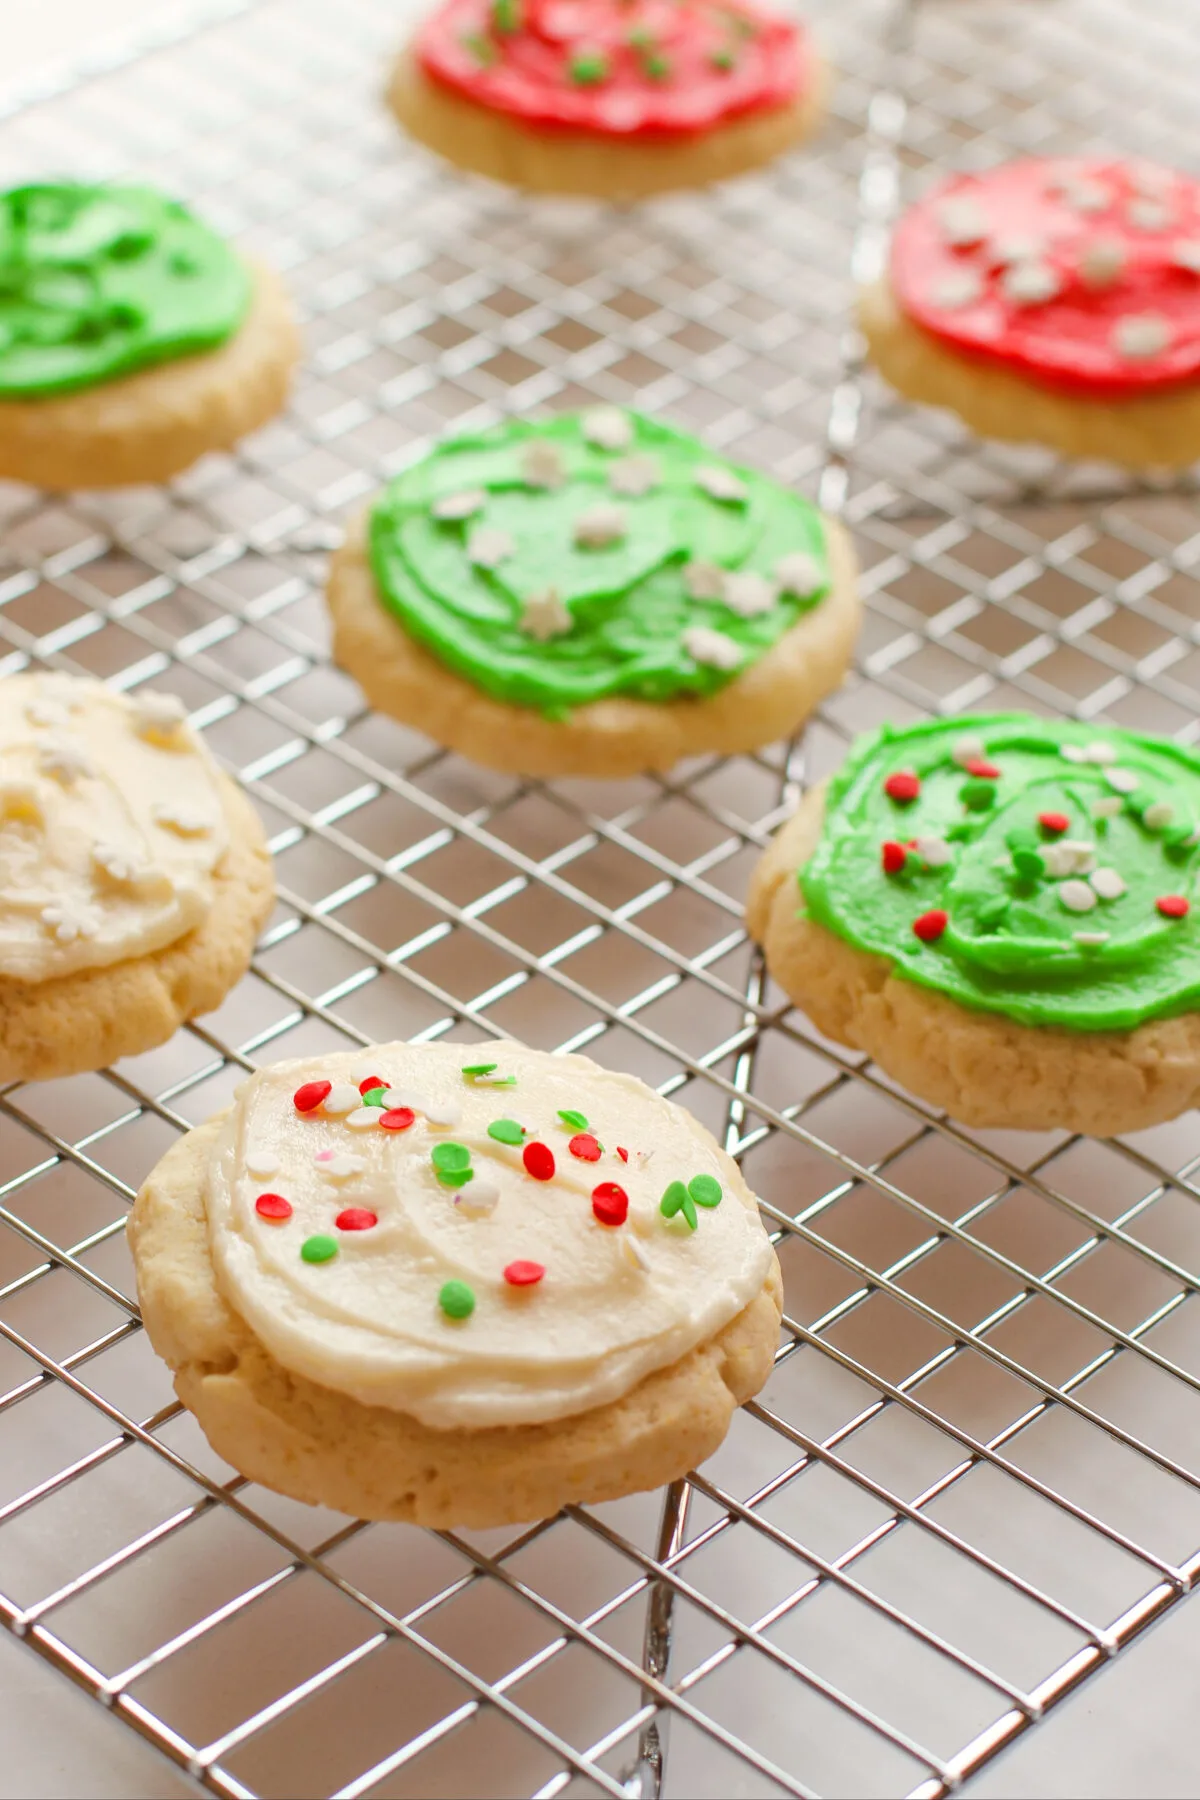 My copycat recipe for the famous Lofthouse frosted sugar cookies. These soft and cakey cookies are a must have around Christmas time!